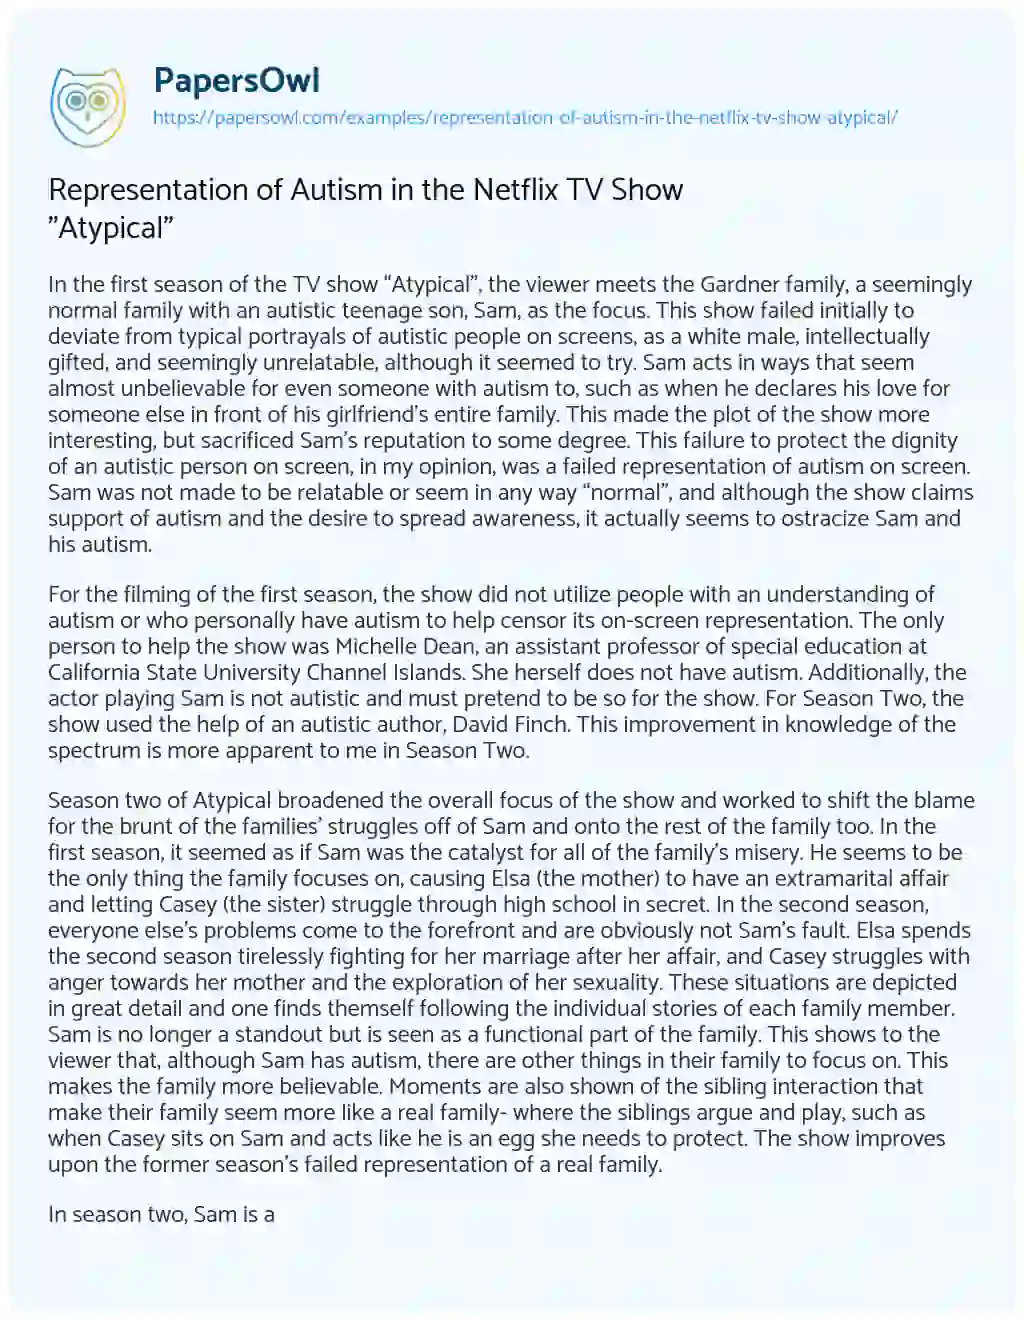 Representation of Autism in the Netflix TV Show “Atypical” essay